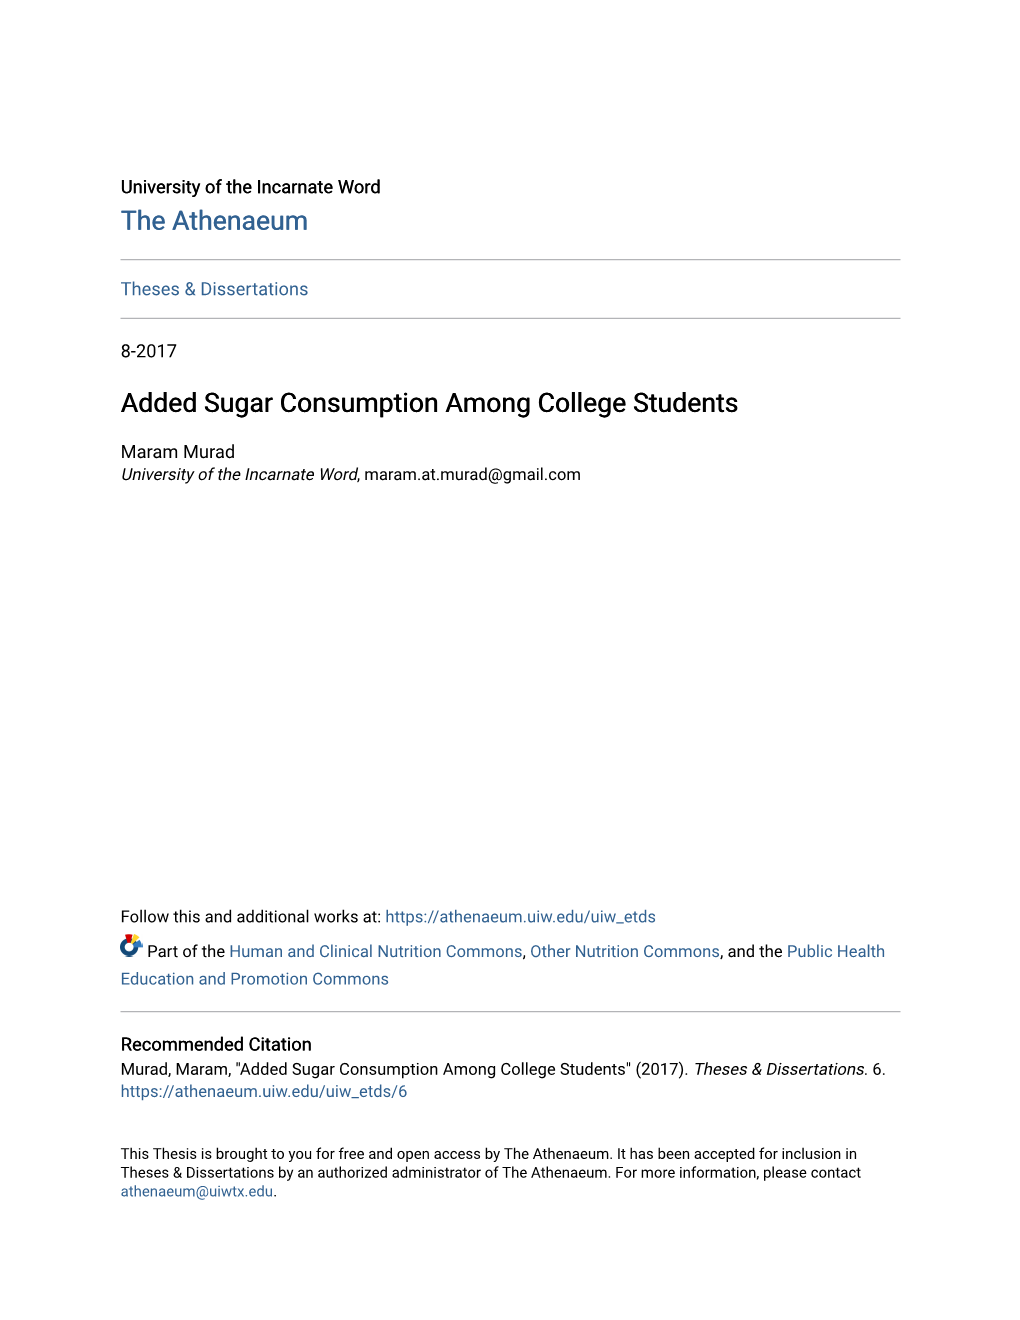 Added Sugar Consumption Among College Students